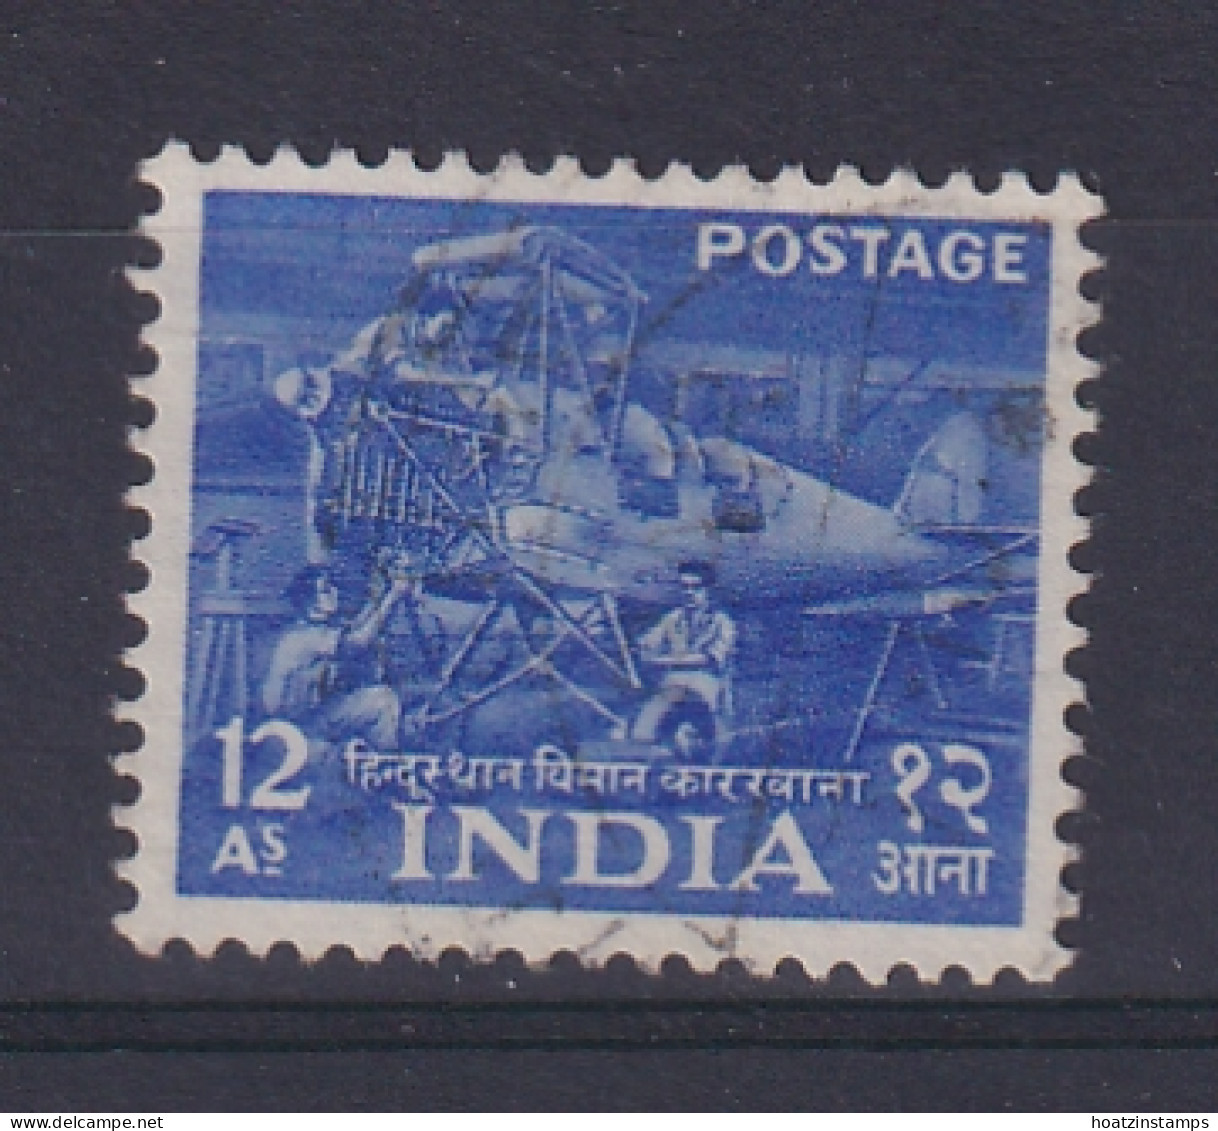 India: 1955   Five Year Plan    SG364    12a   Used - Usati